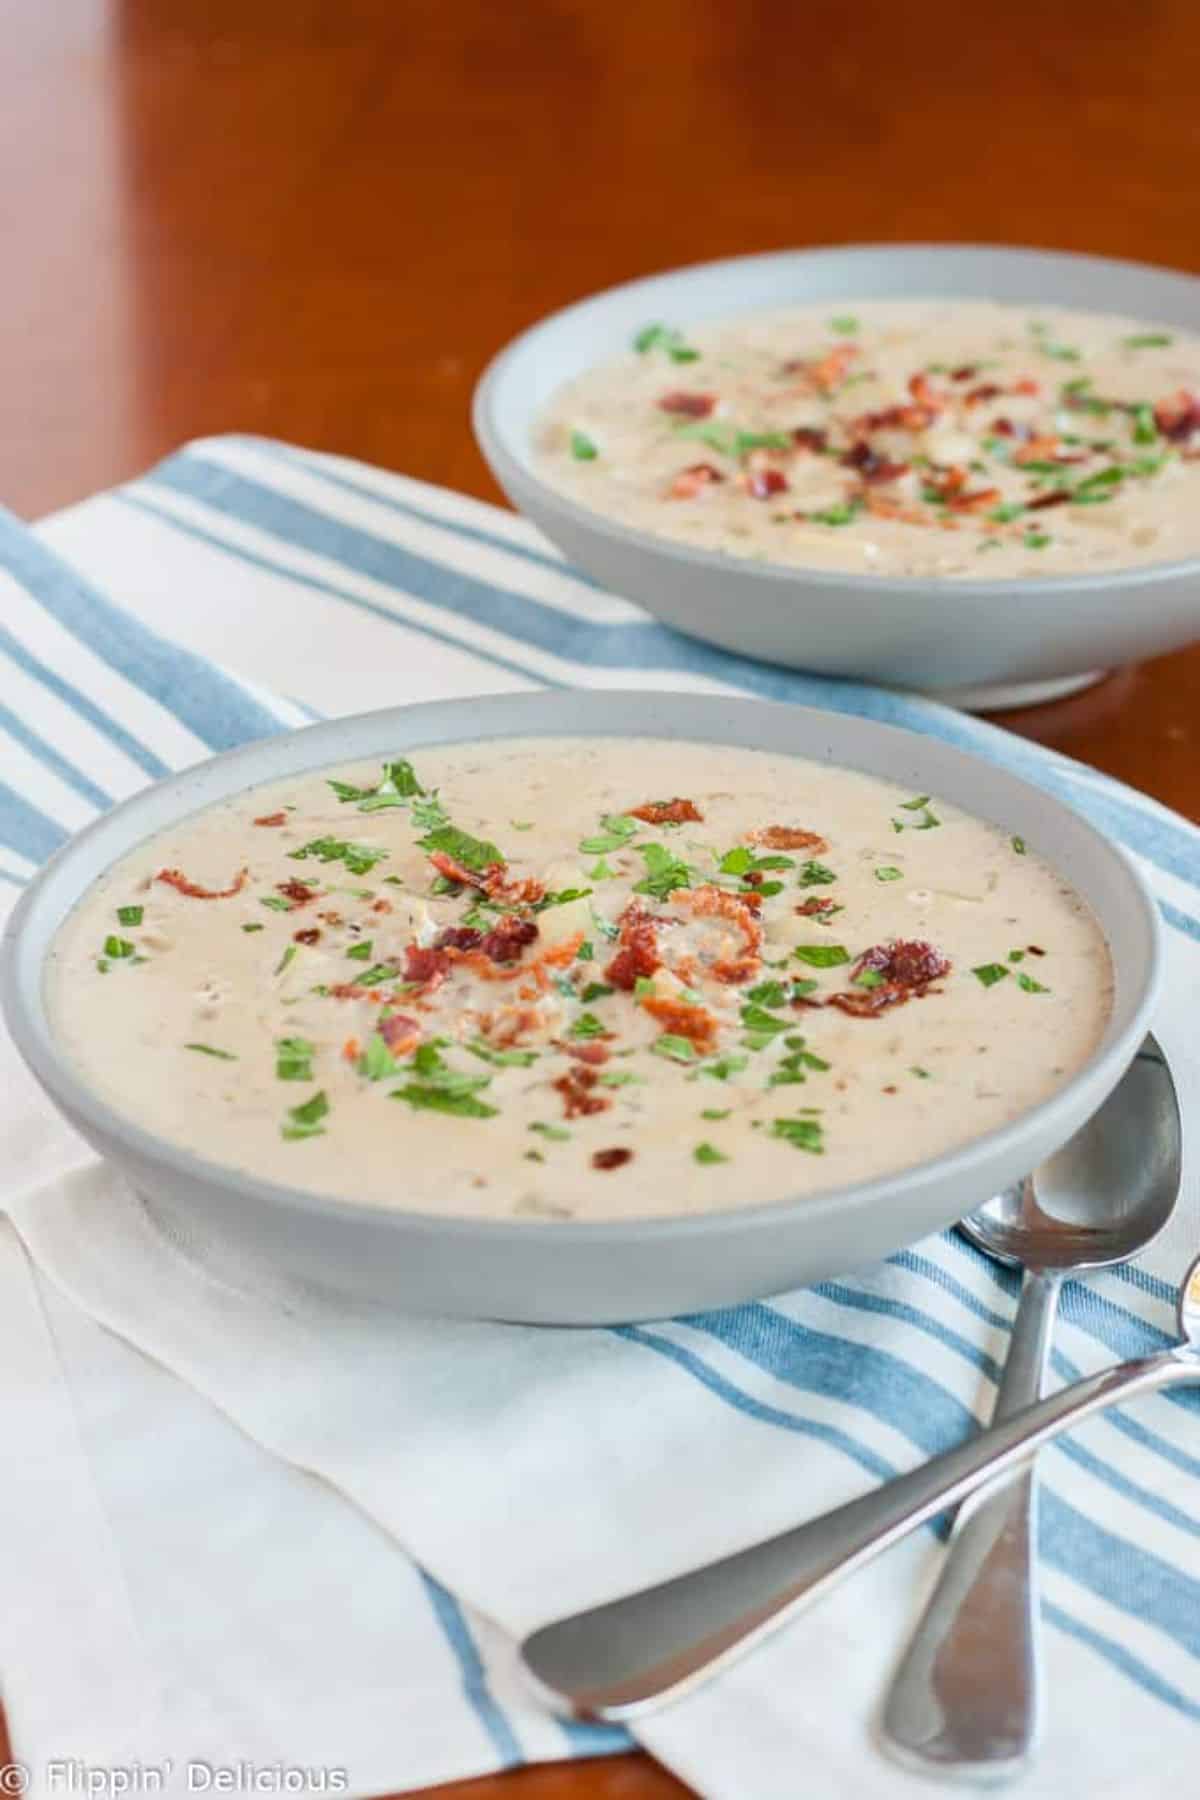 Delicious Gluten-Free Clam Chowder in gray bowls.